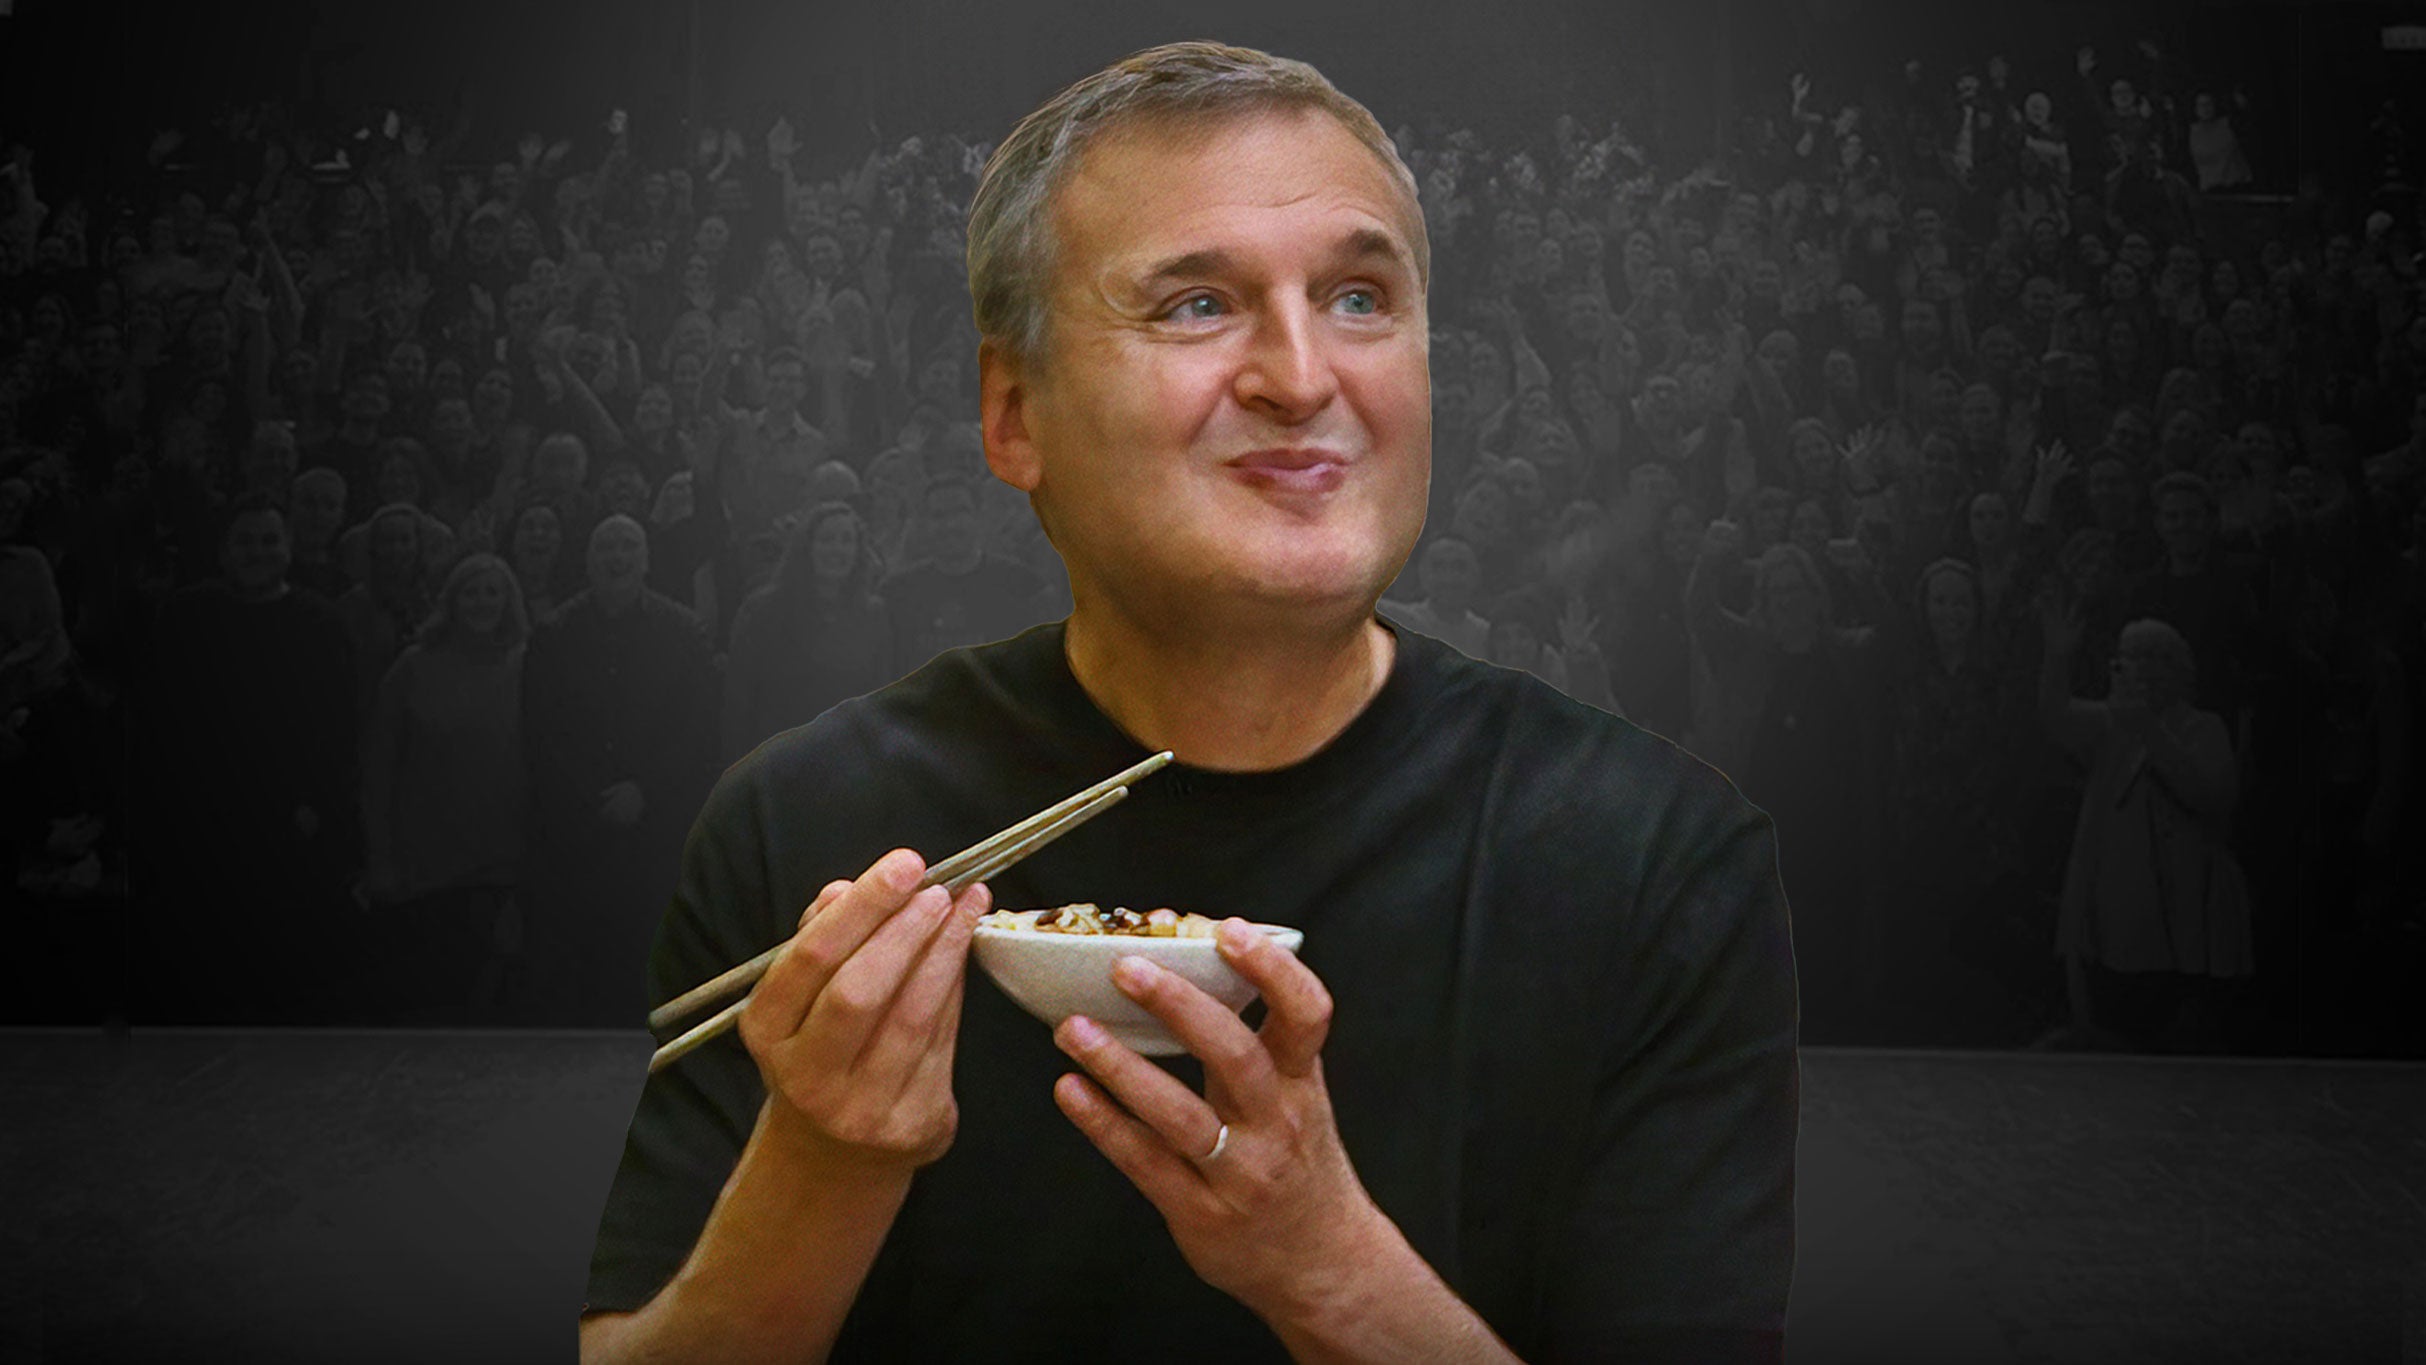 An Evening With Phil Rosenthal Of "Somebody Feed Phil" presales in Seattle